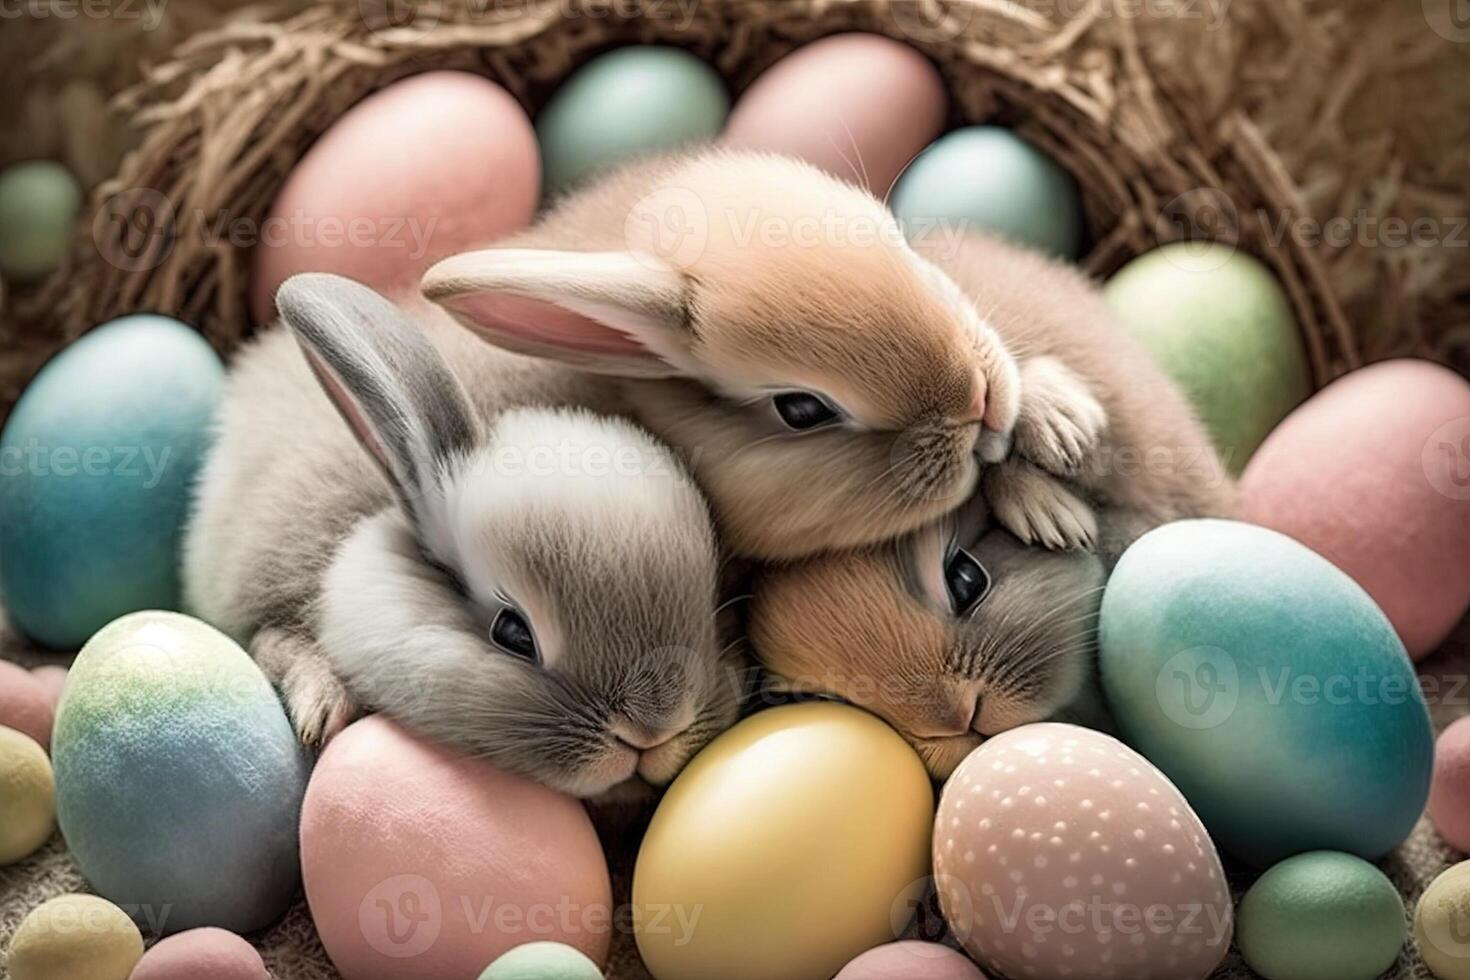 Cute bunnies cuddled up together, surrounded by pastel - colored Easter eggs Easter illustration photo